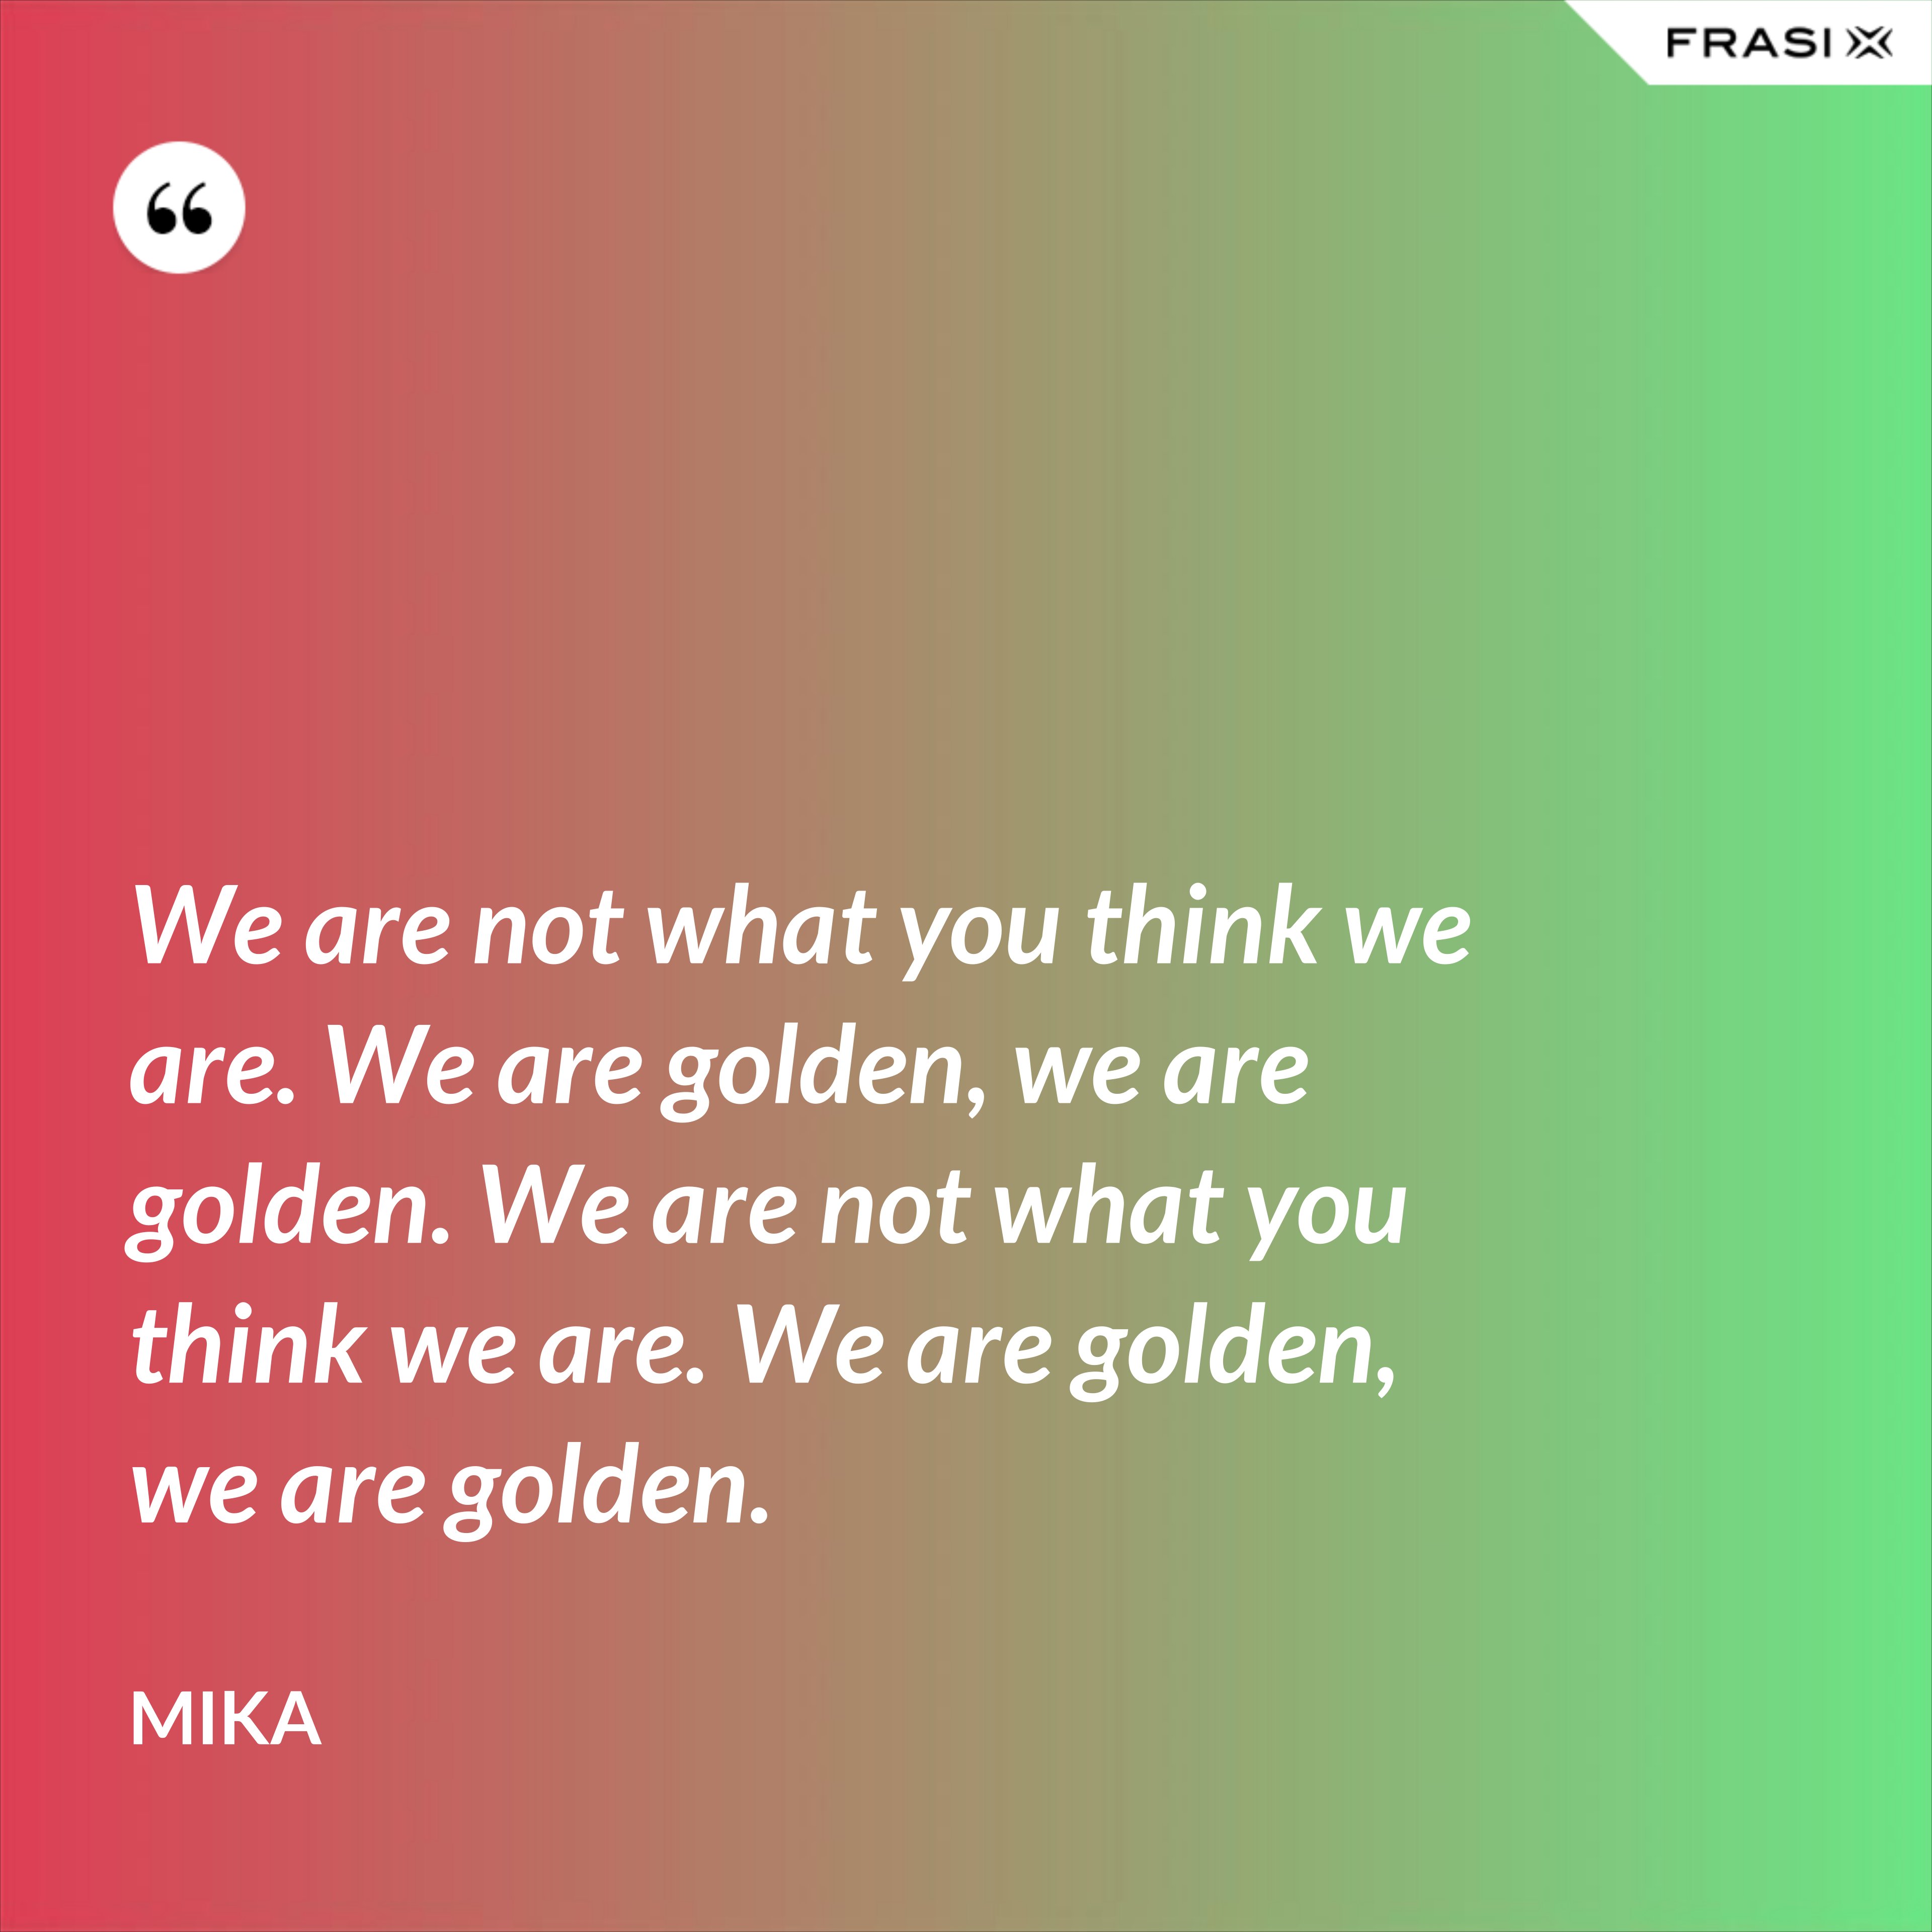 We are not what you think we are. We are golden, we are golden. We are not what you think we are. We are golden, we are golden. - Mika